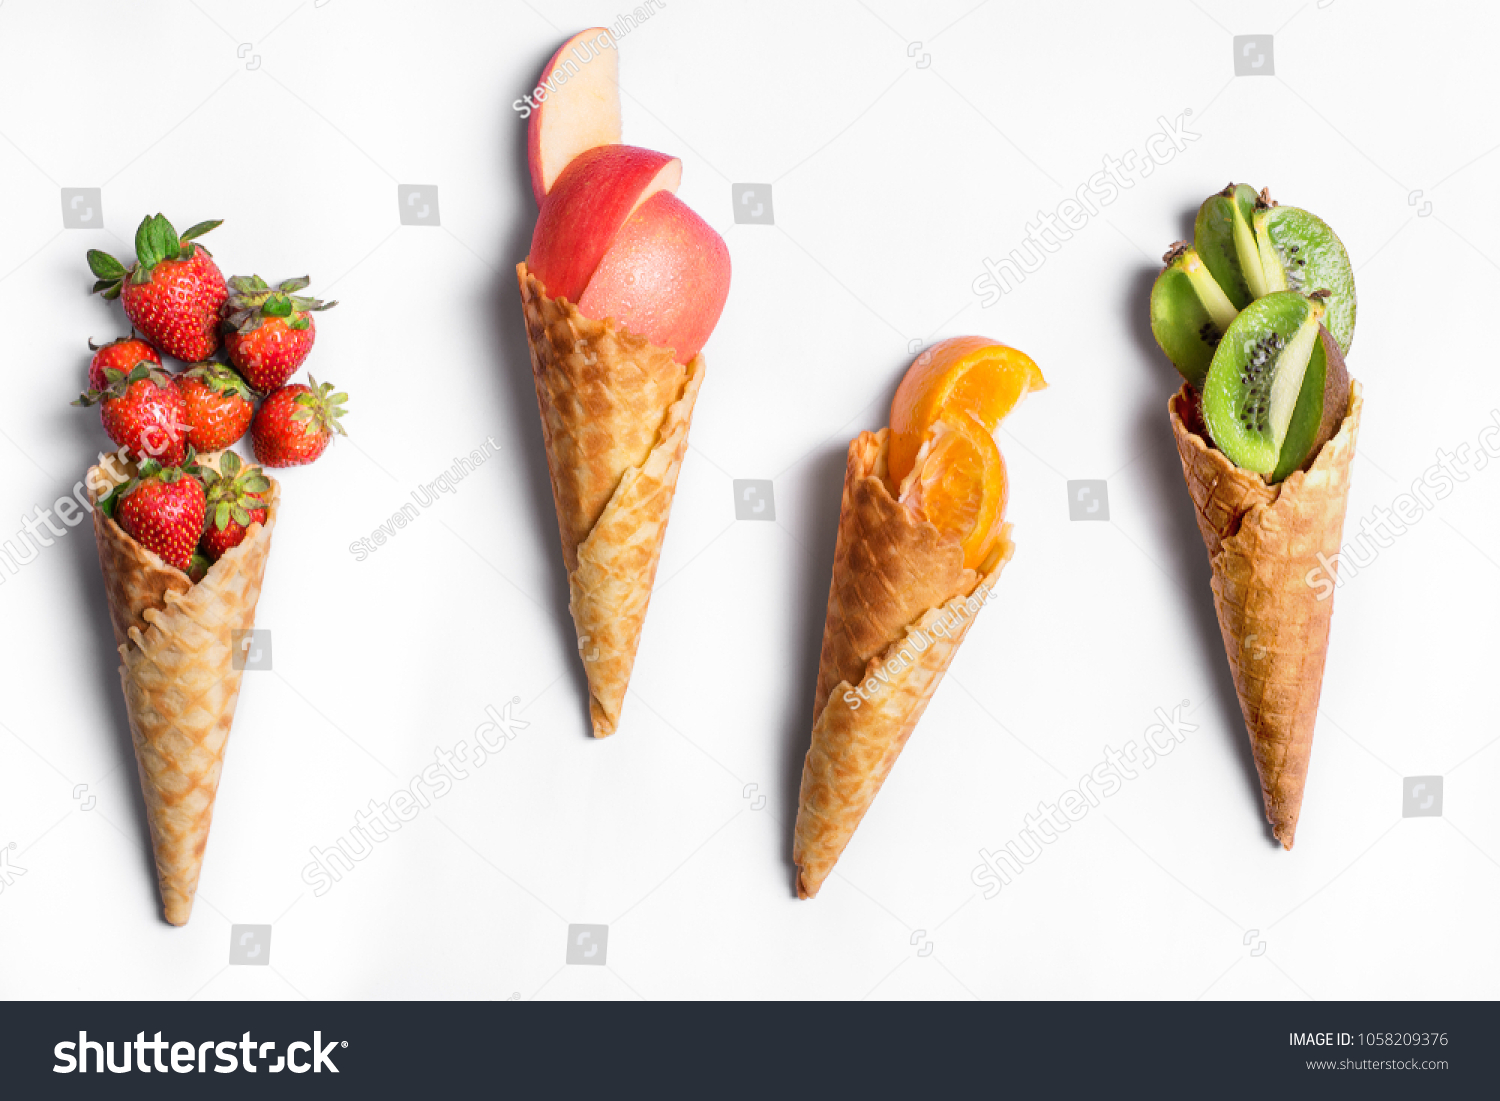 Fruit in waffle cones isolated on white background - healthy ice cream options. #1058209376